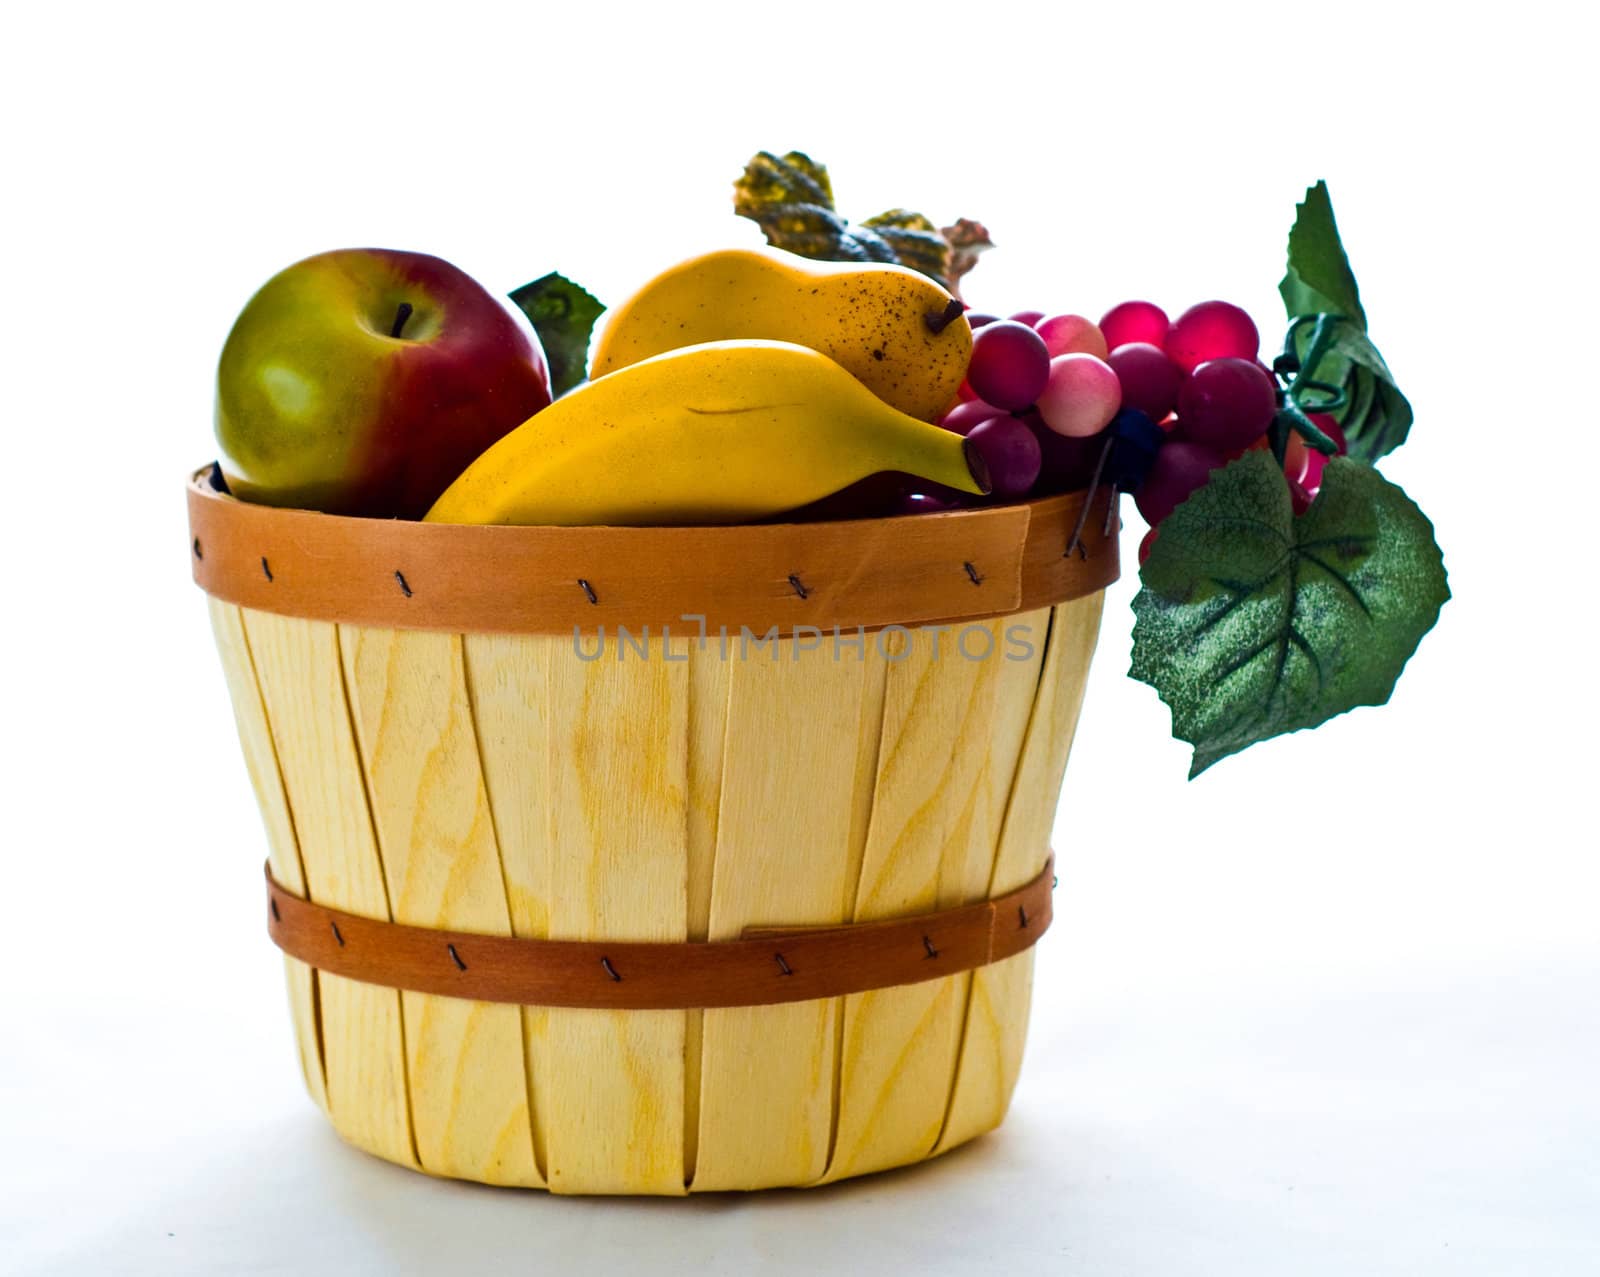 Assorted fruit arranged in a basket for a still life.